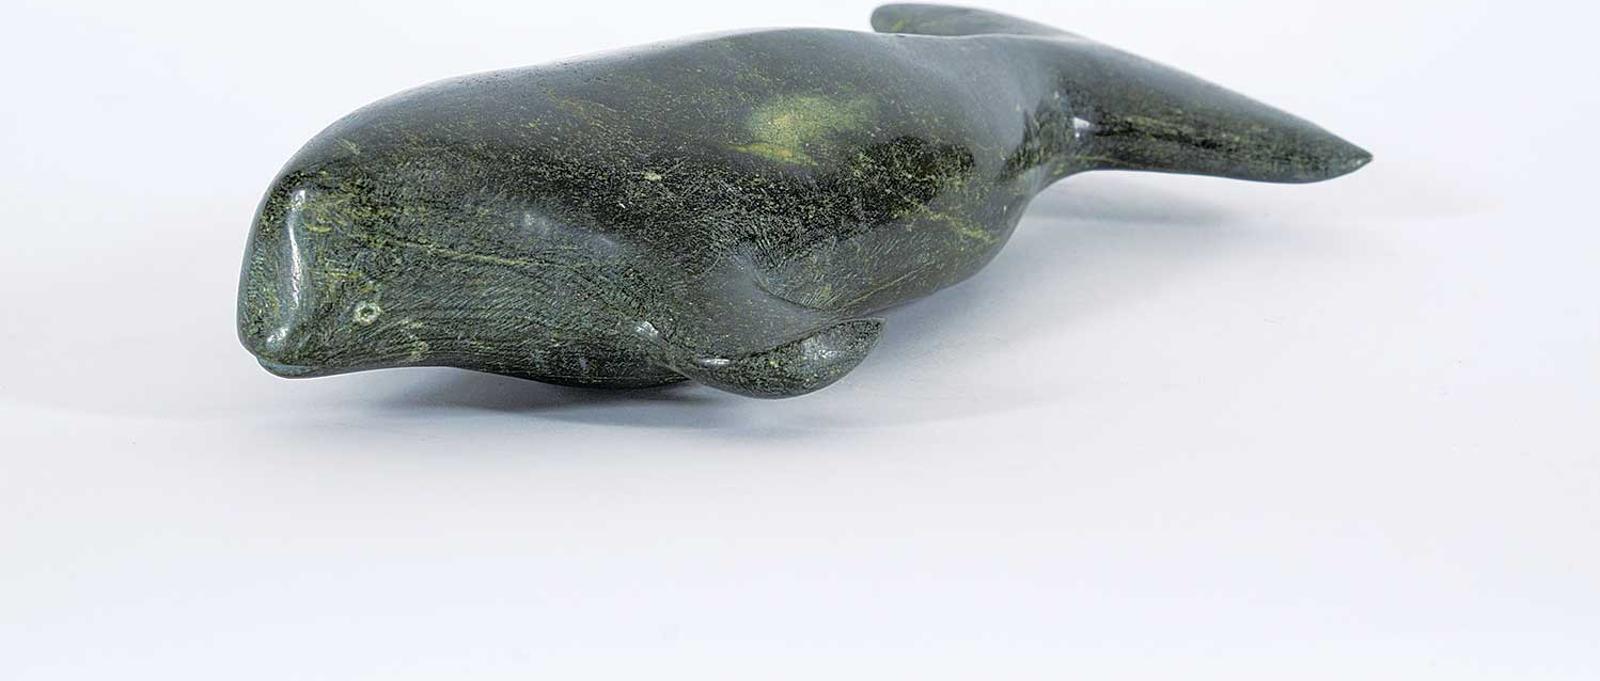 Karpik - Untitled - Young Whale